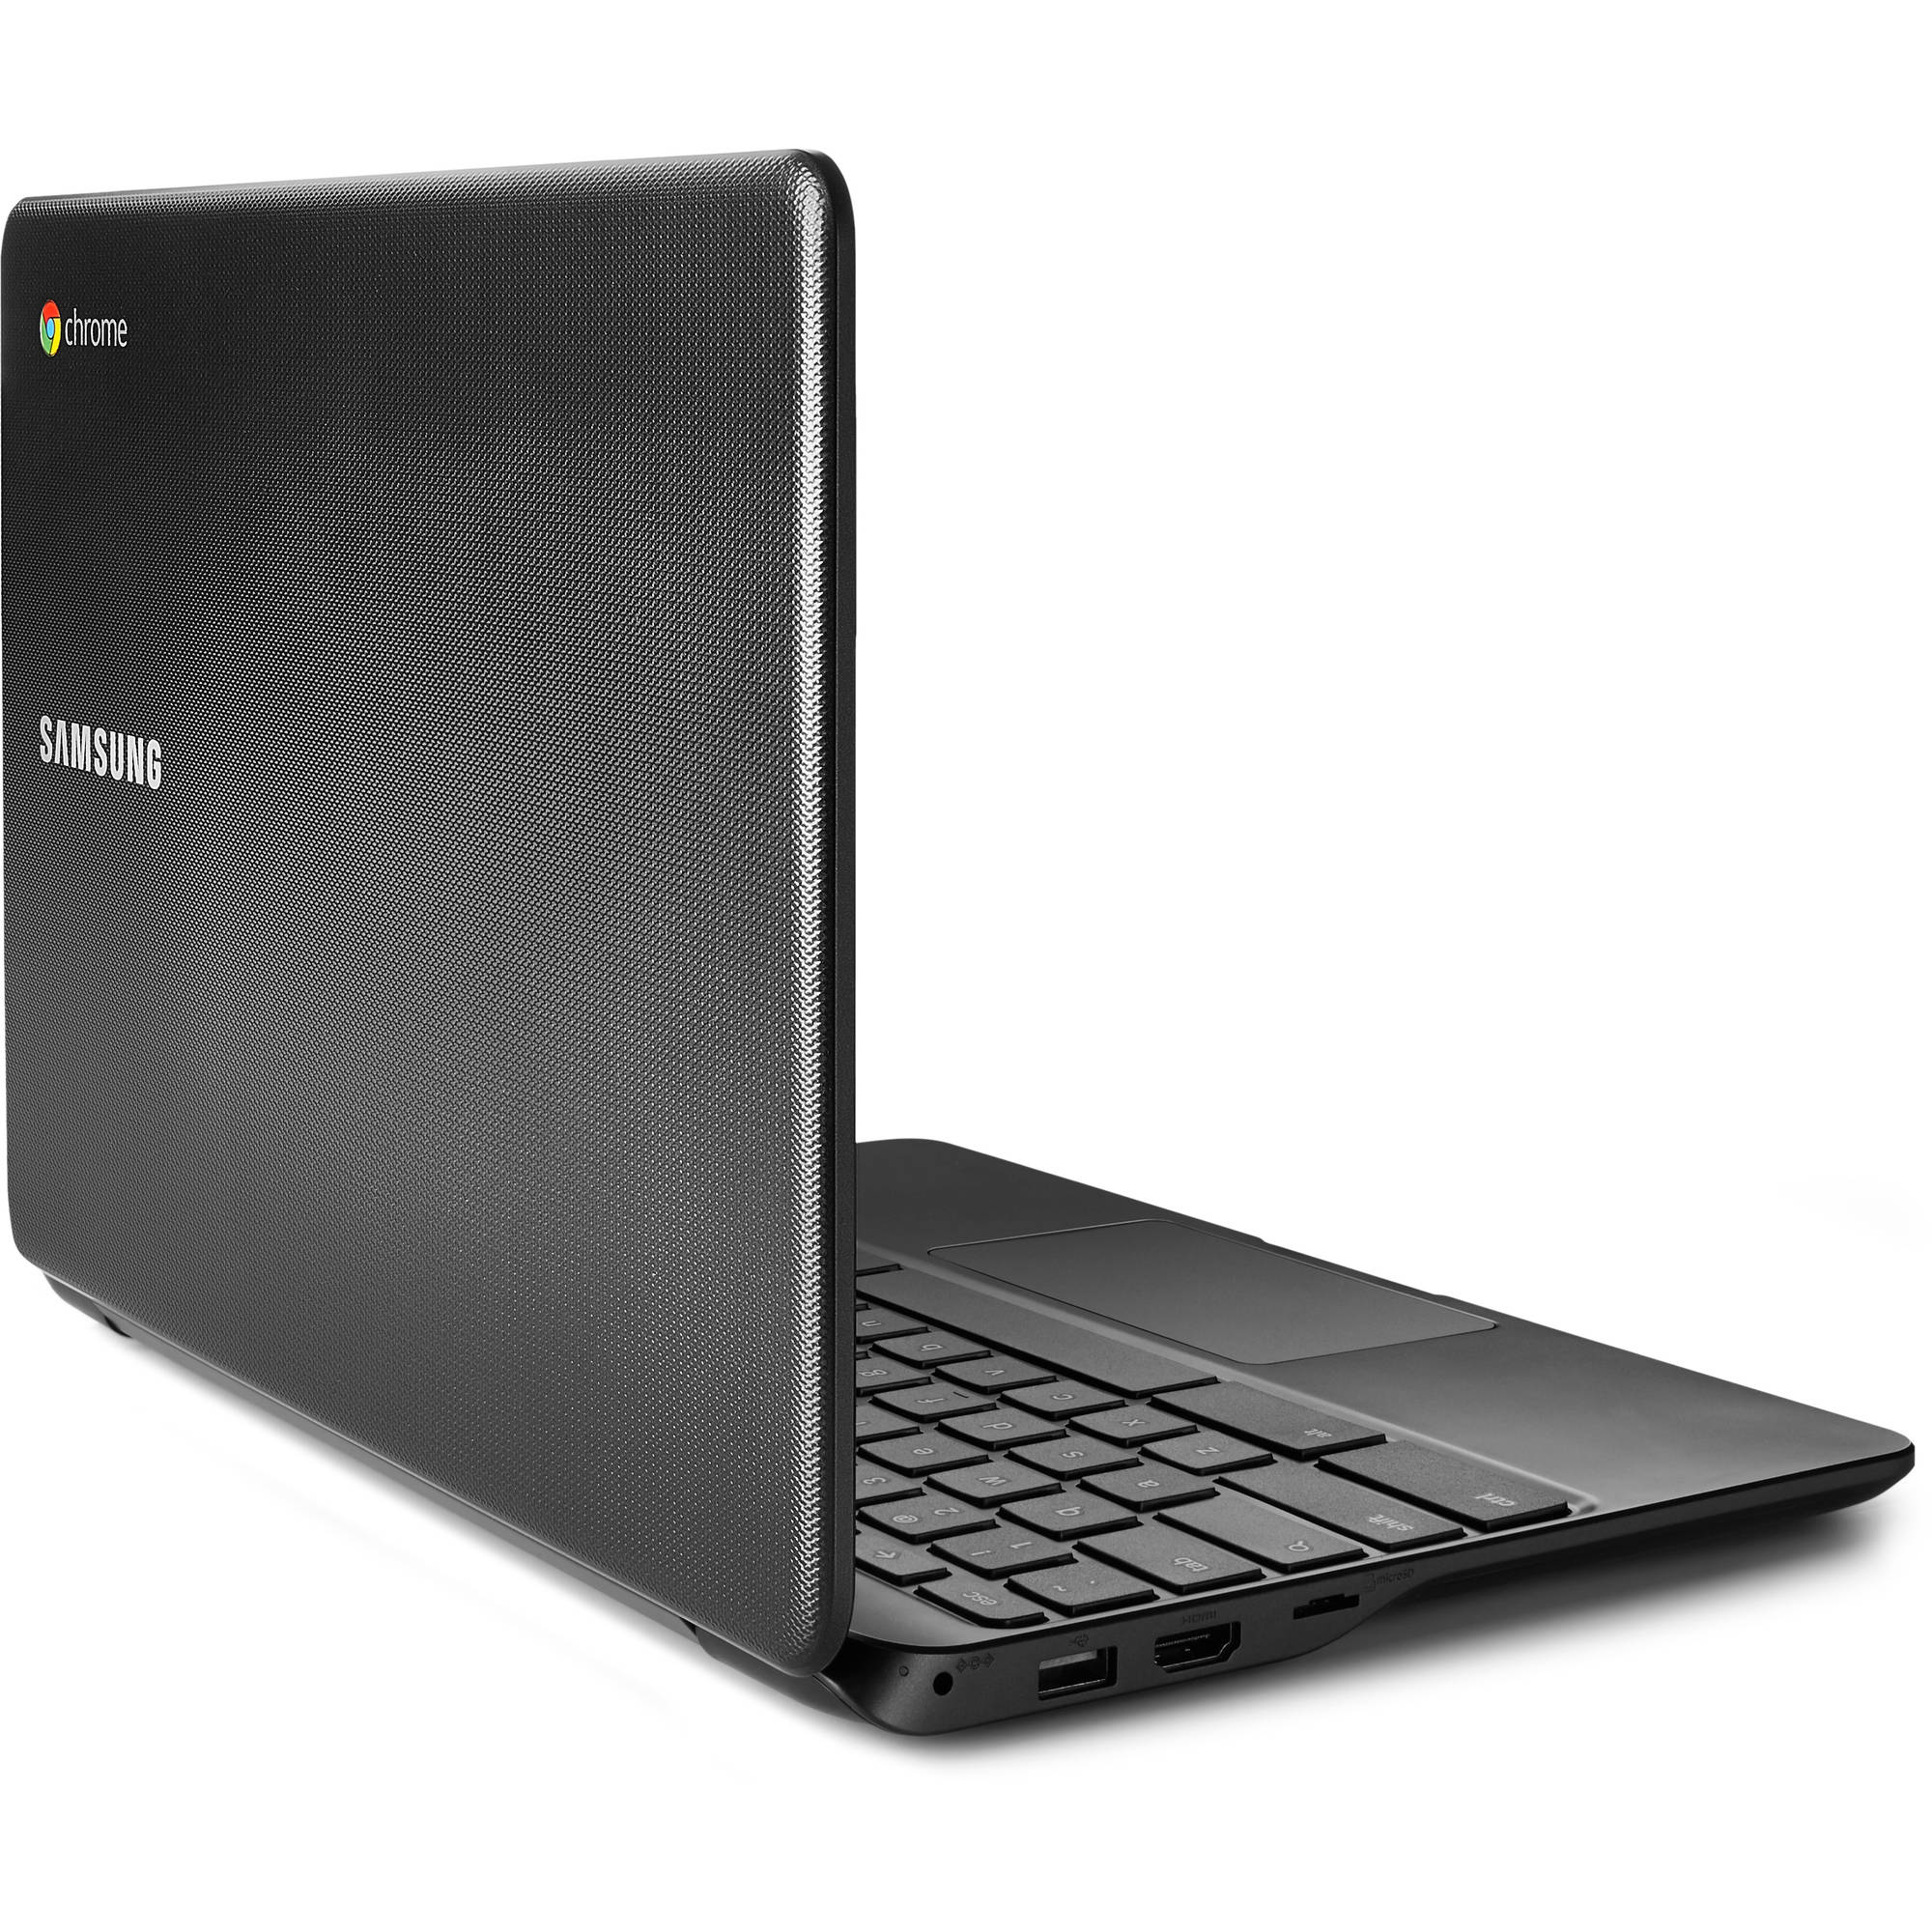 Restored | Samsung Chromebook | 11.6-inch | Intel Celeron N3050 | 4GB RAM | 16GB SSD | Bundle: USA Essentials Bluetooth/Wireless Airbuds, Wireless Mouse By Certified 2 Day Express - image 4 of 8